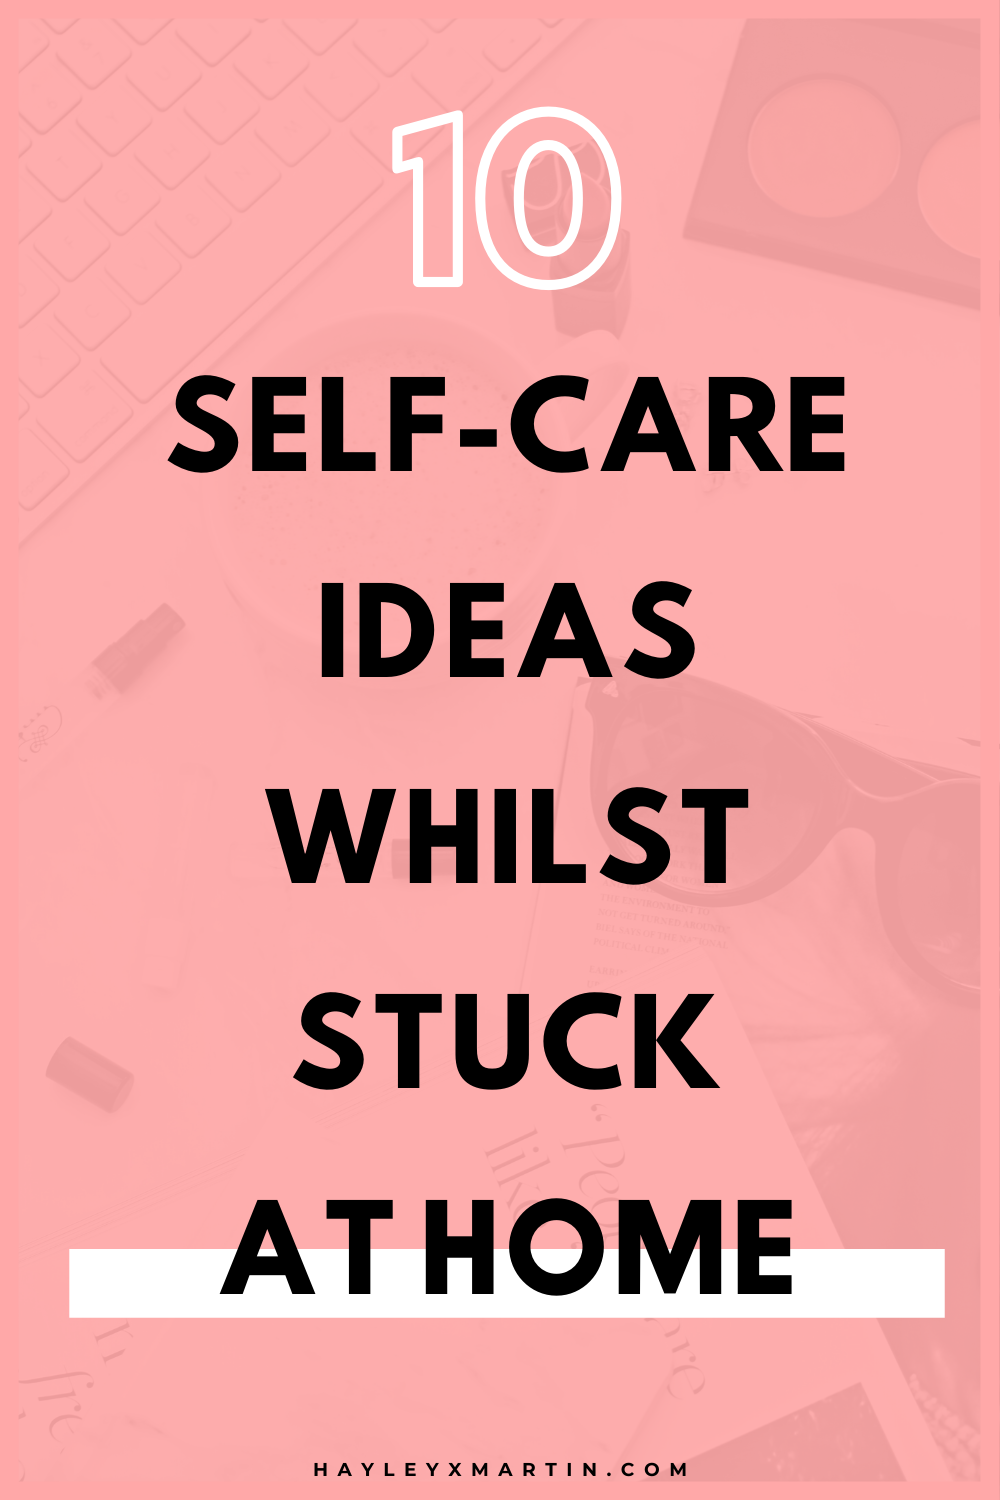 10 SELF-CARE IDEAS WHILST STUCK AT HOME | HAYLEYXMARTIN